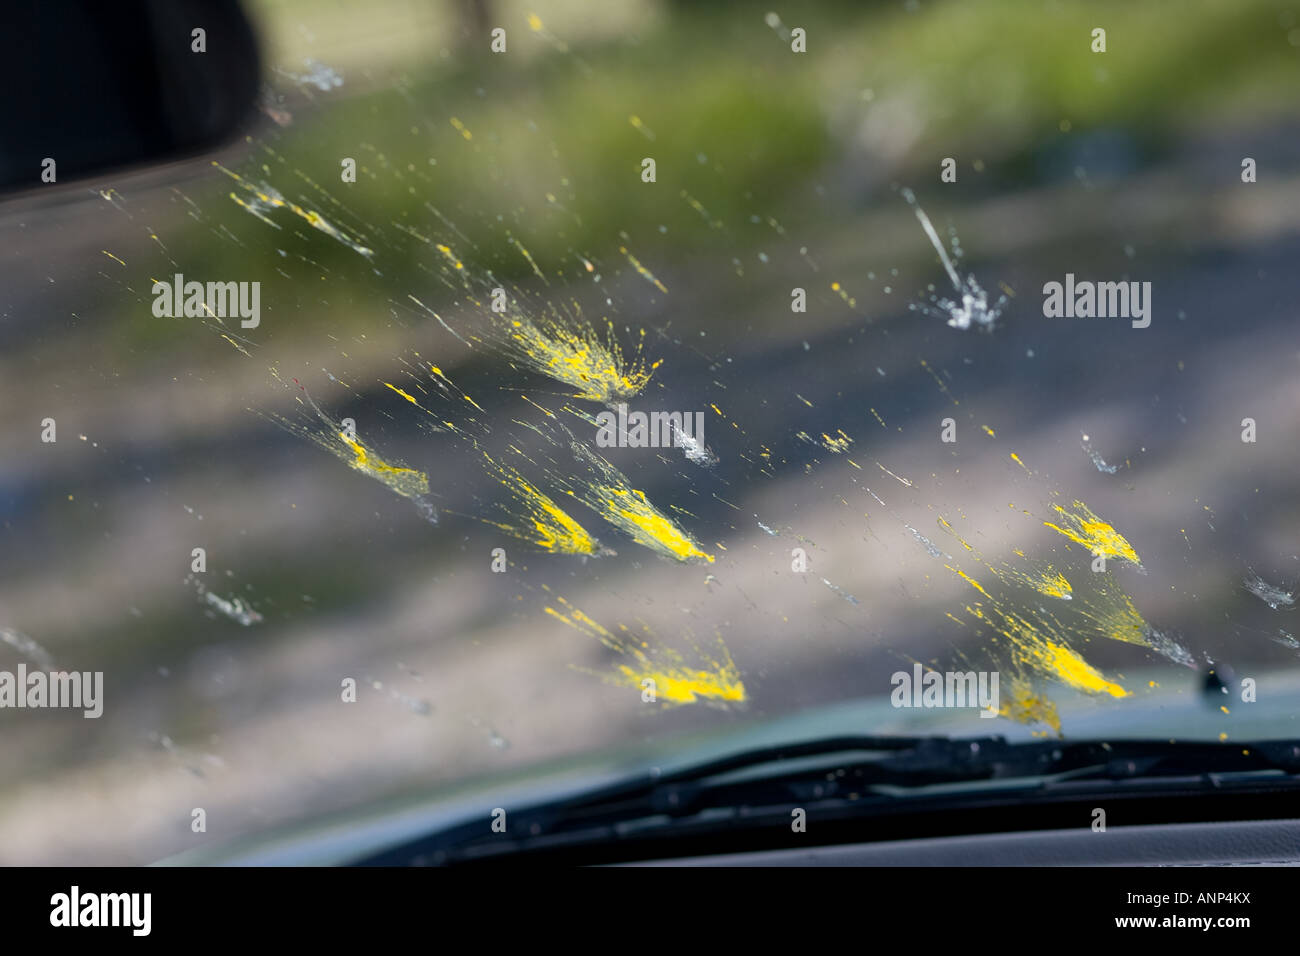 Dead bugs are splattered all over the windshield of a car during a road trip Stock Photo